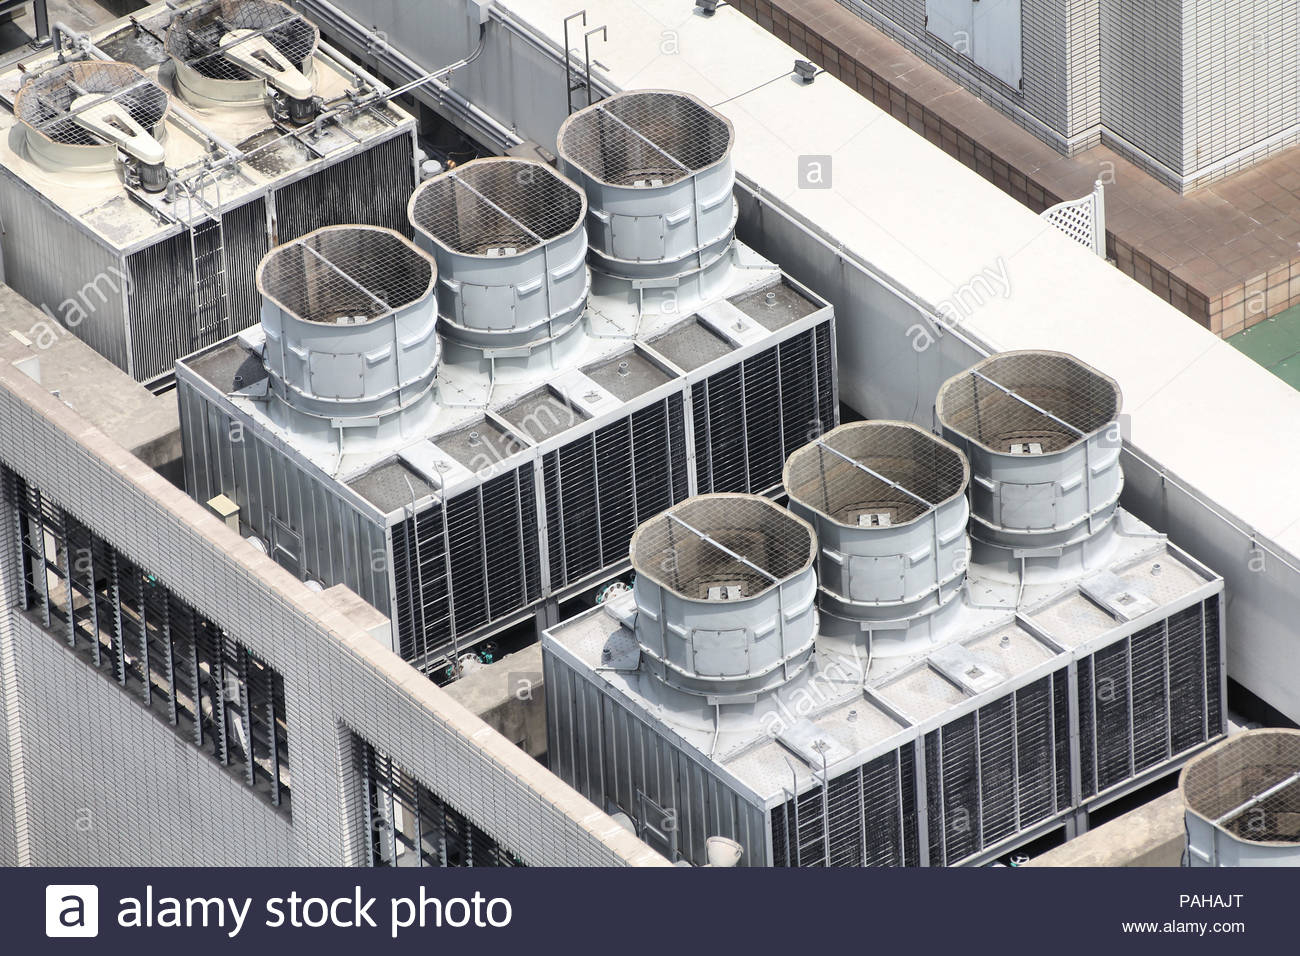 Exhaust Vents Of Industrial Air Conditioning And Ventilation with sizing 1300 X 956